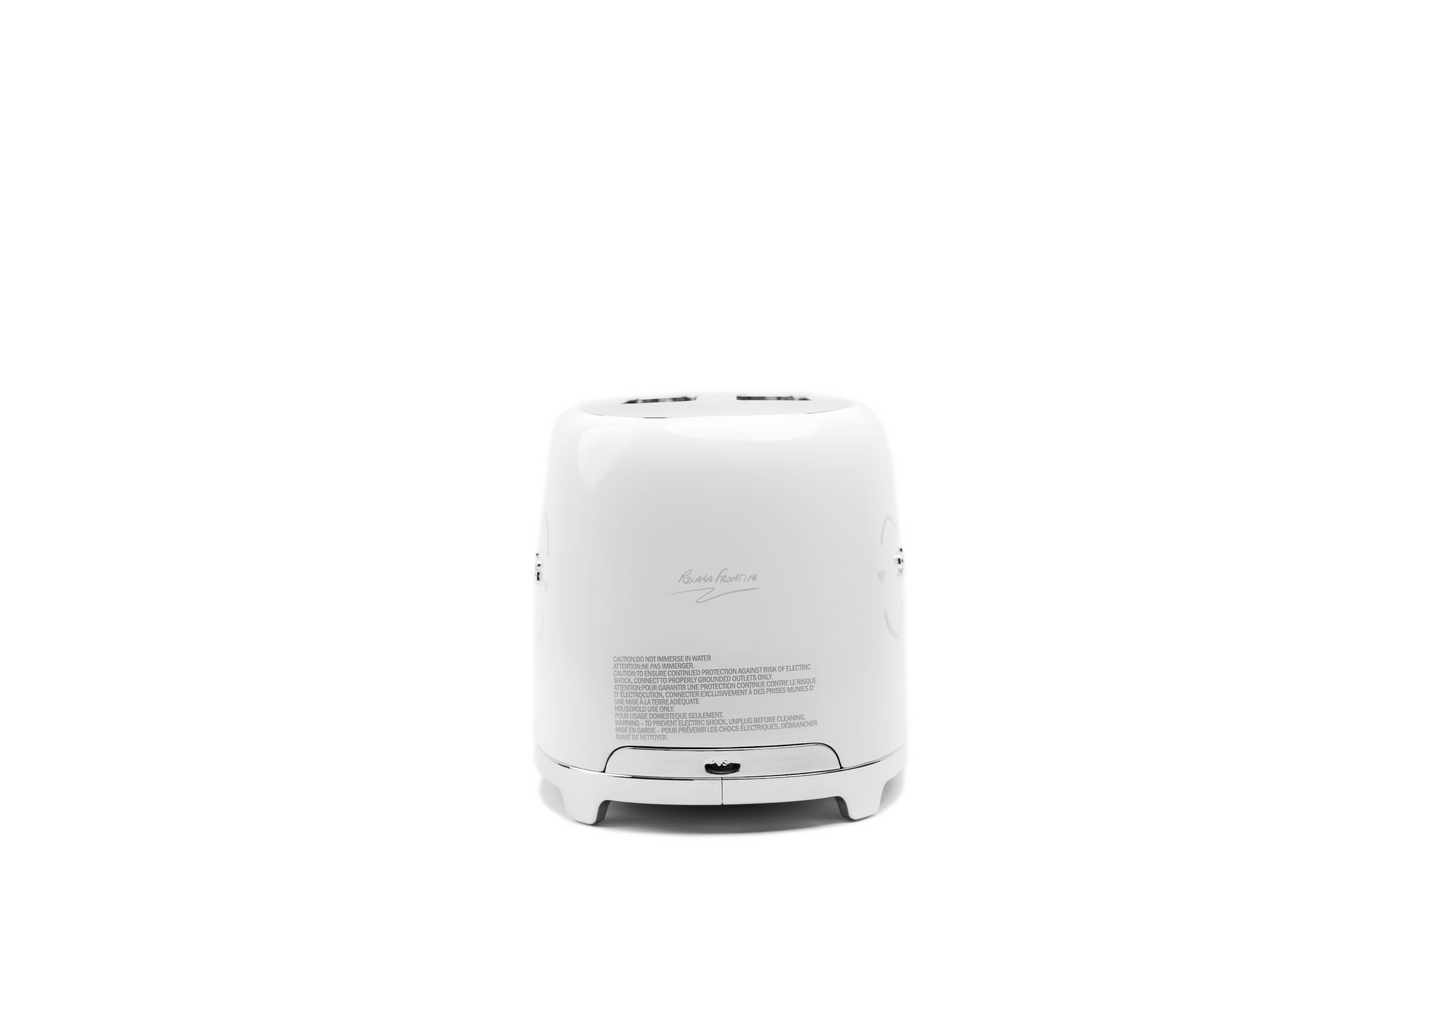 SMEG 2-Slice Silver & White Toaster By ROXANA FRONTINI Series "LOVE SWEET HOME"